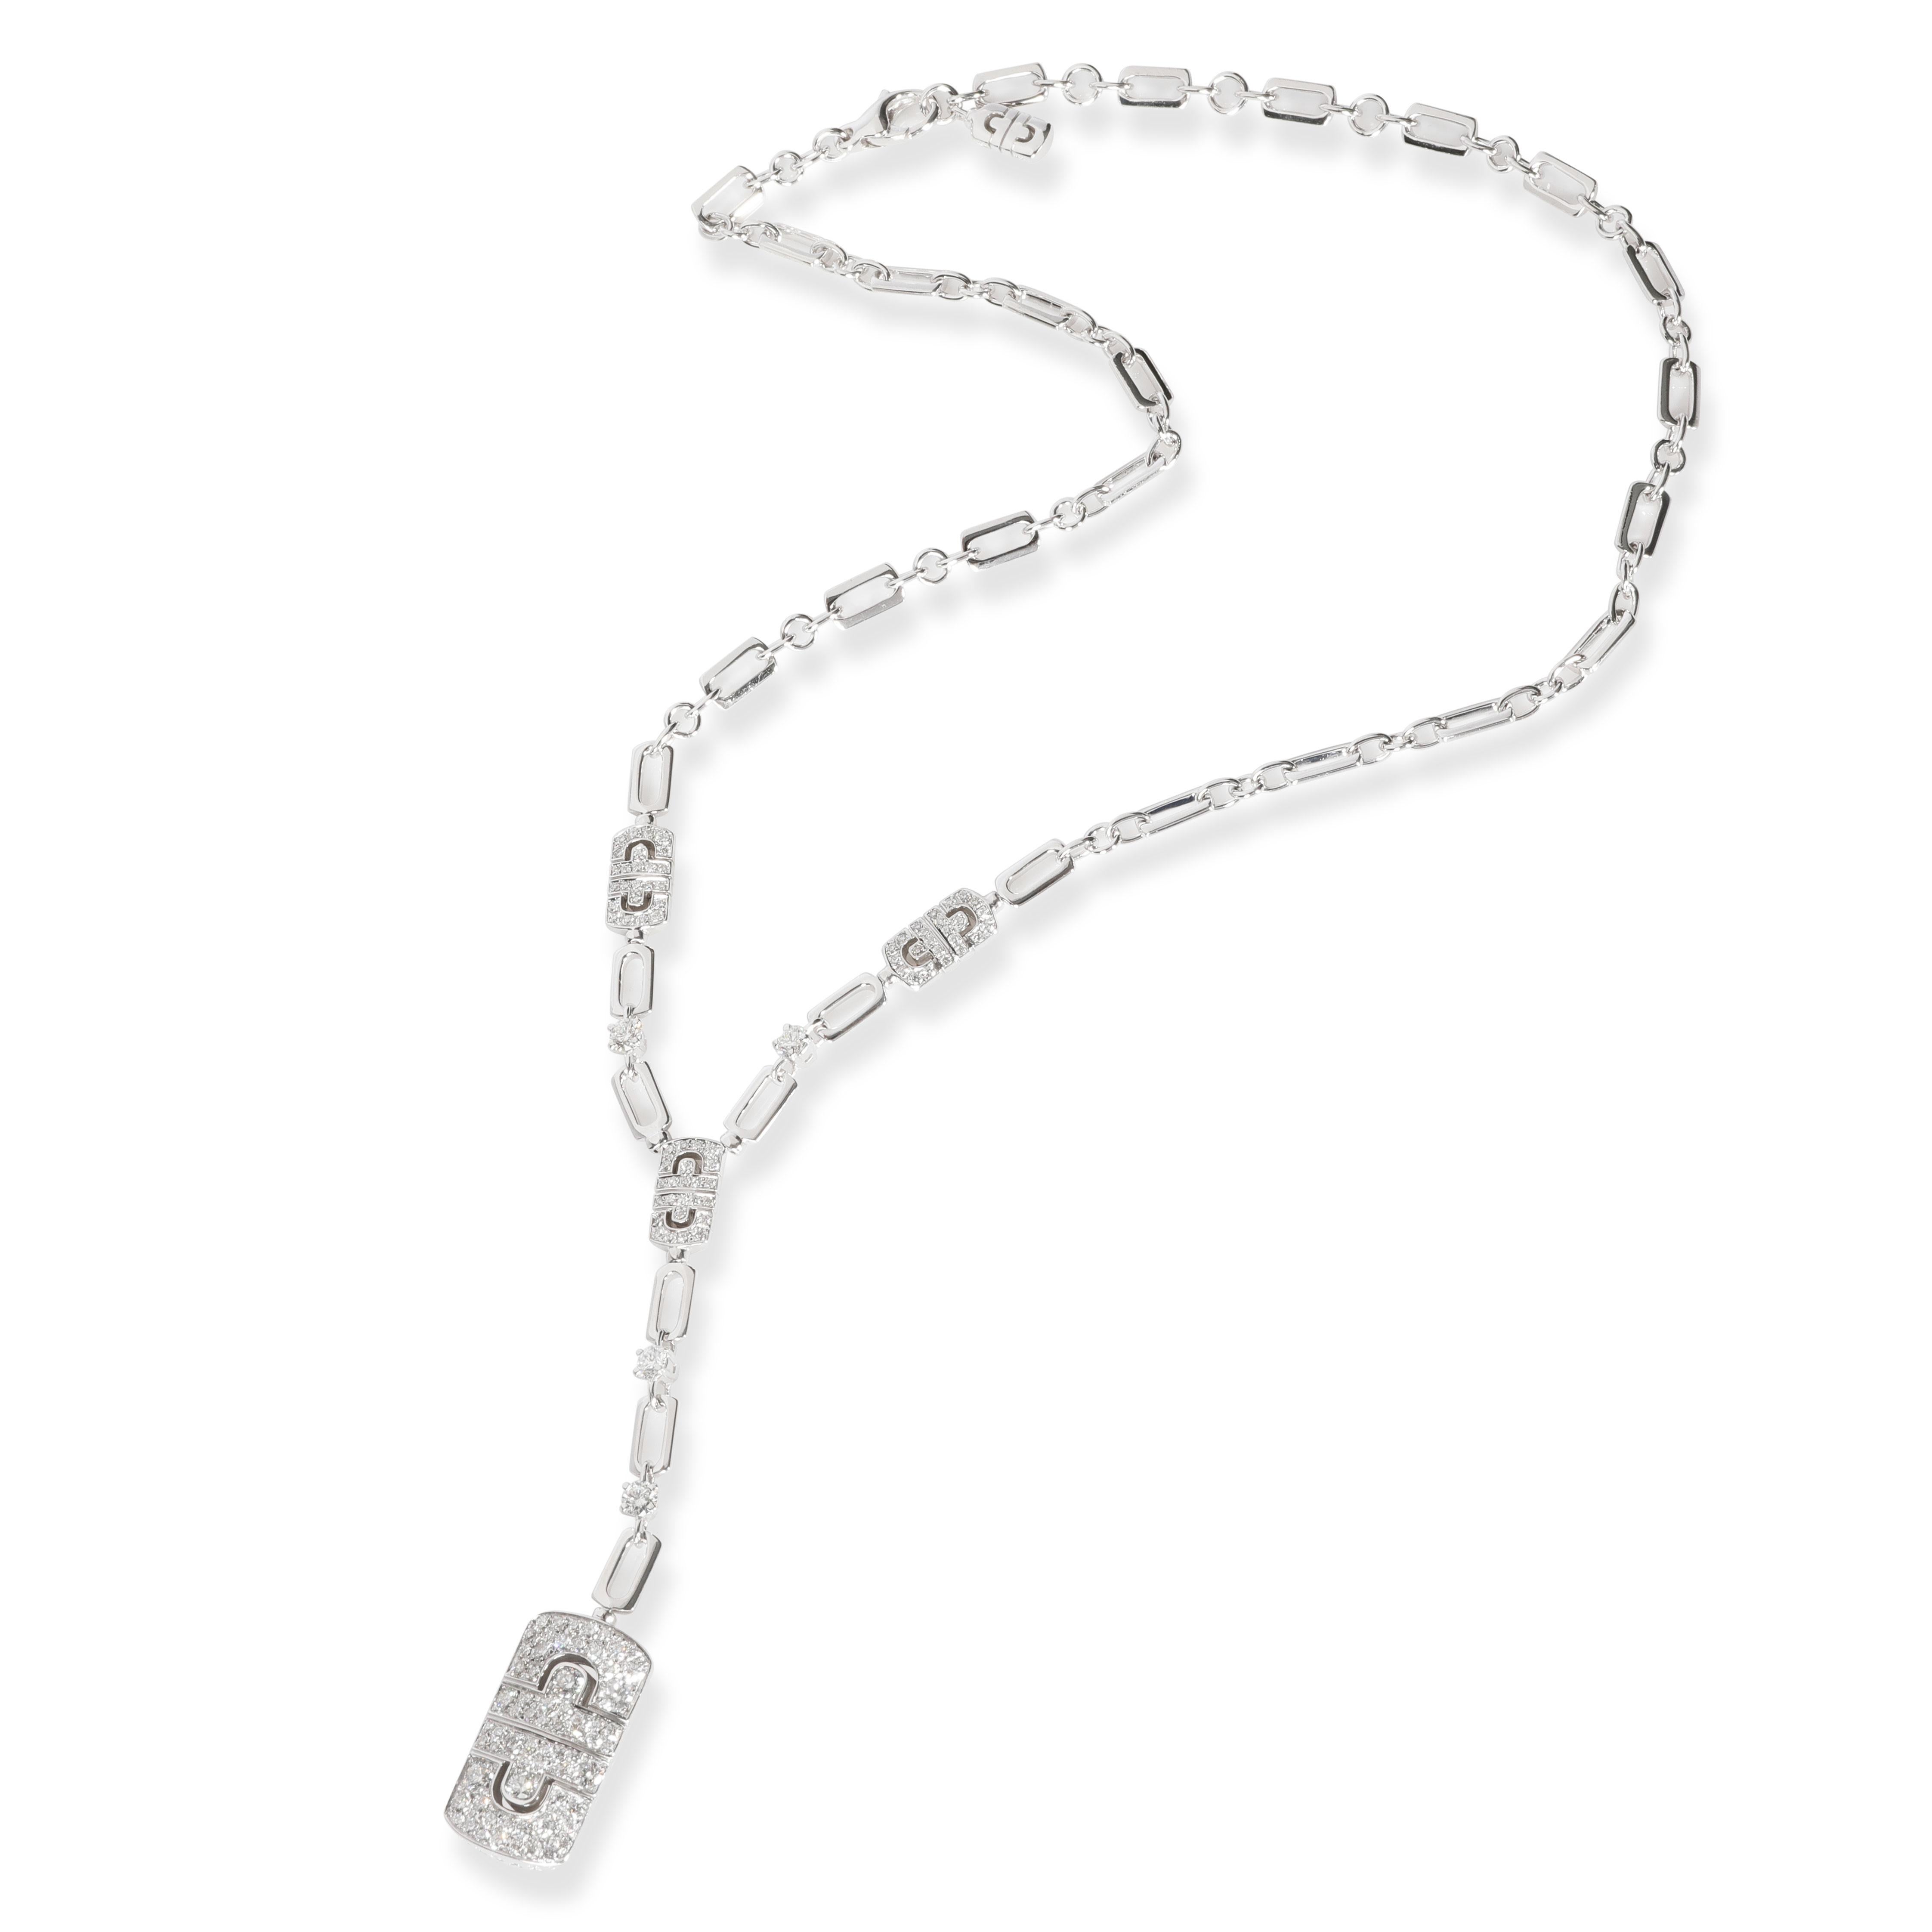 Bulgari Parentesi Diamond Necklace in 18K White Gold 2.63 CTW

PRIMARY DETAILS
SKU: 107501
Listing Title: Bulgari Parentesi Diamond Necklace in 18K White Gold 2.63 CTW
Condition Description: Retails for 28,000 USD. In excellent condition and